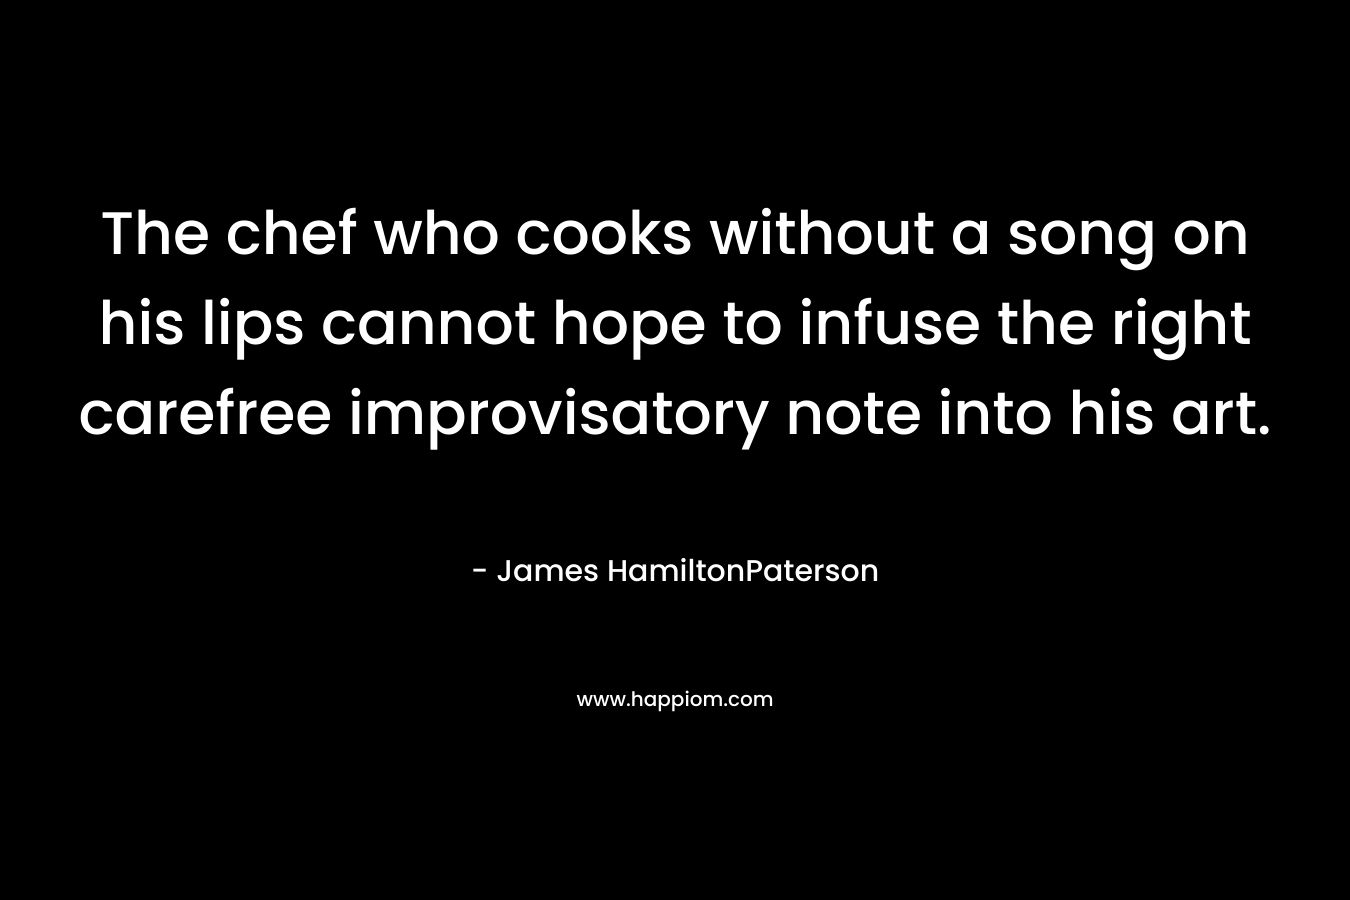 The chef who cooks without a song on his lips cannot hope to infuse the right carefree improvisatory note into his art. – James HamiltonPaterson